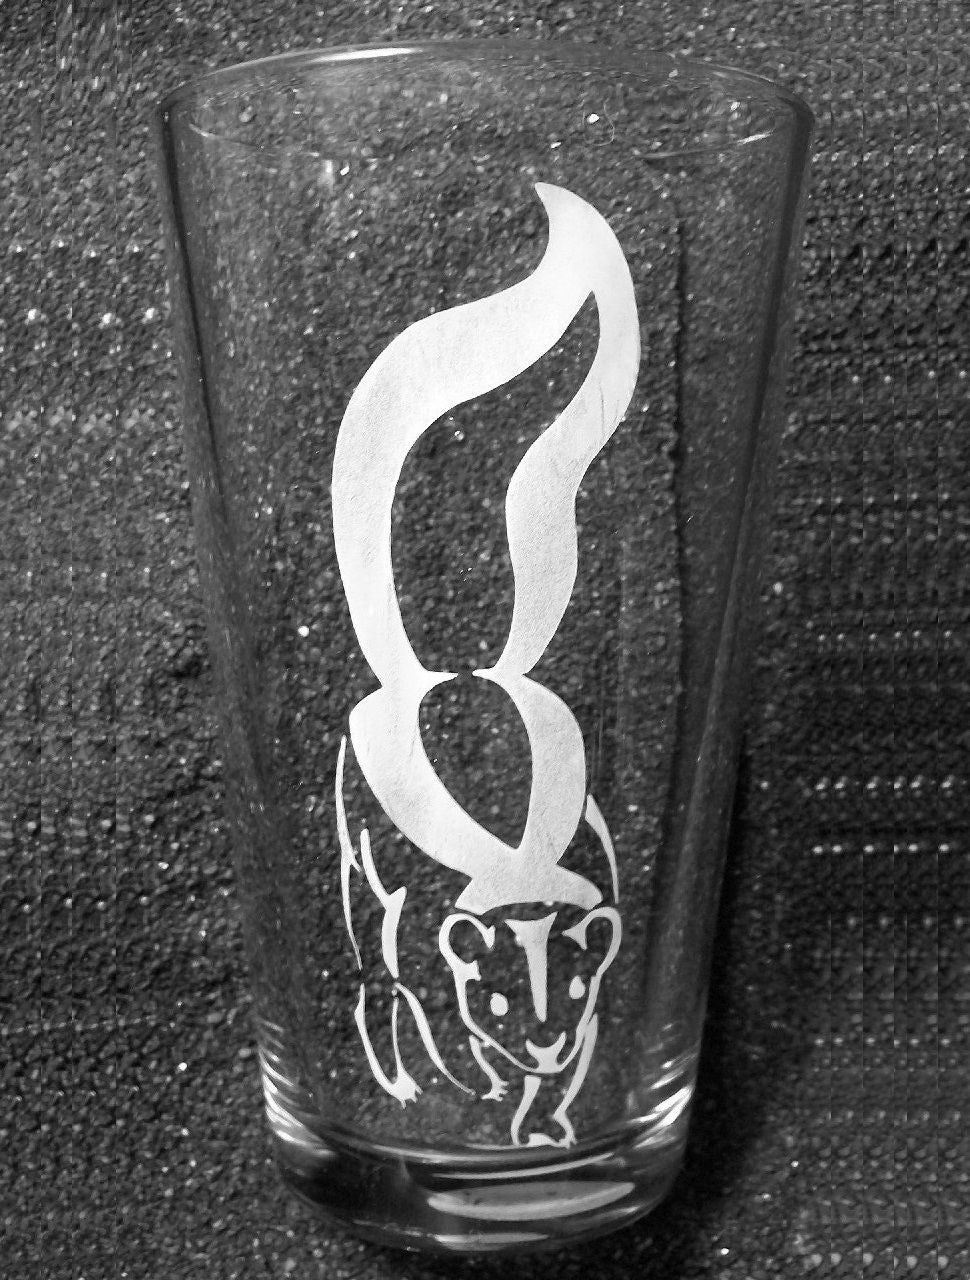 Skunk tribal tattoo etched pint glass tumbler cup